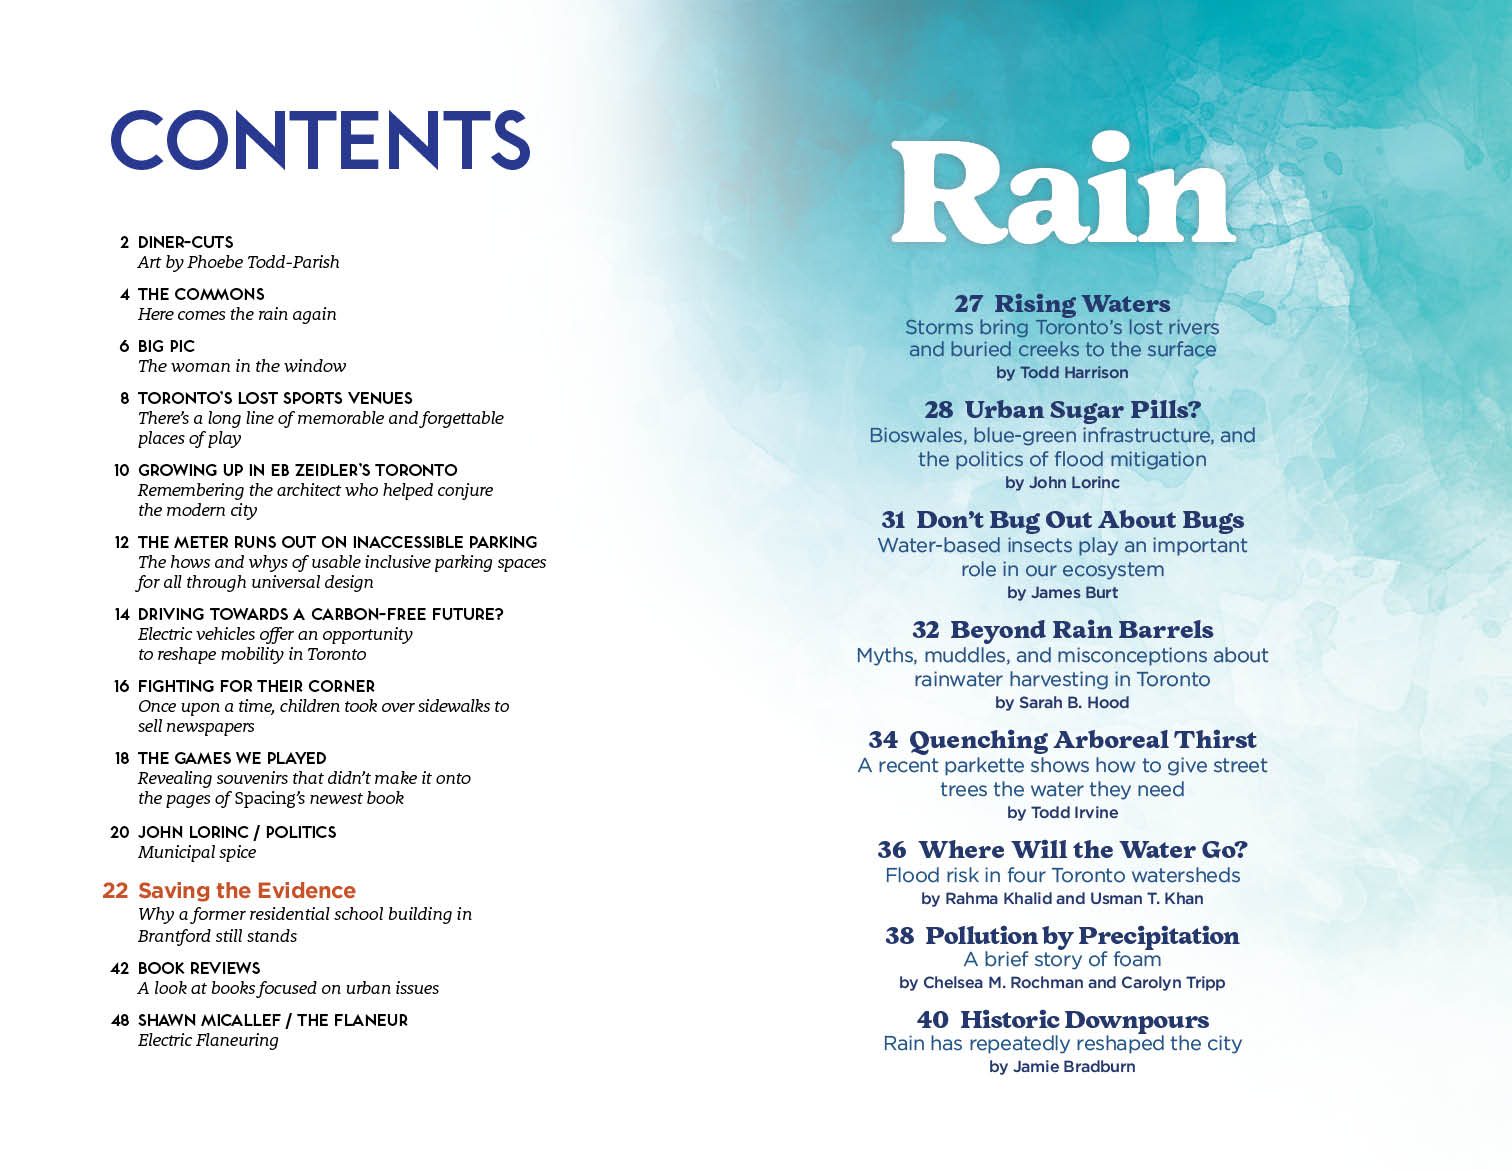 Contents page of rain issue